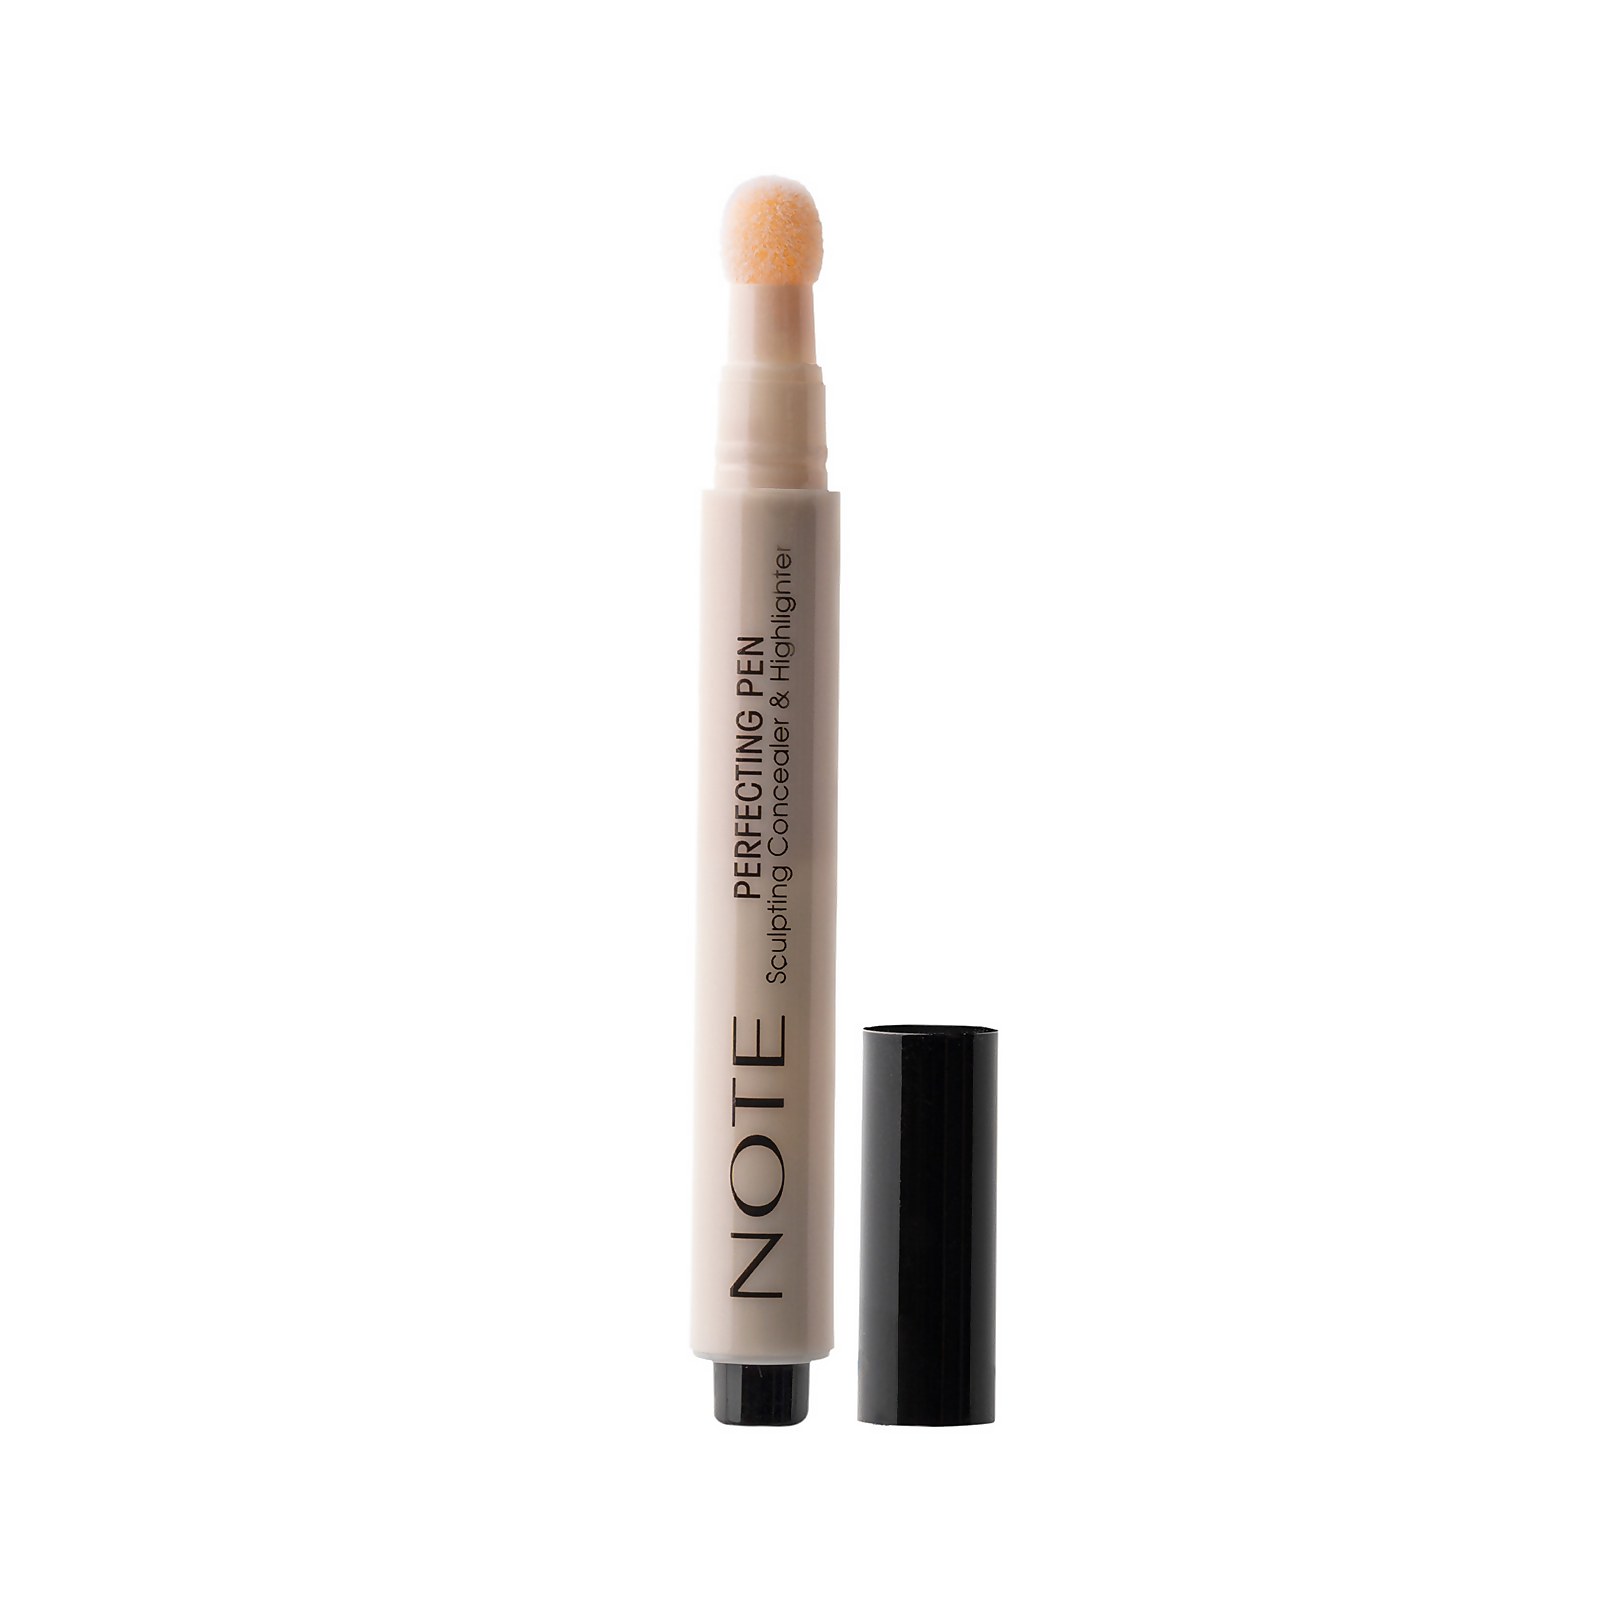 Note Cosmetics Perfecting Pen 3ml (Various Shades) - 03 Light Beige